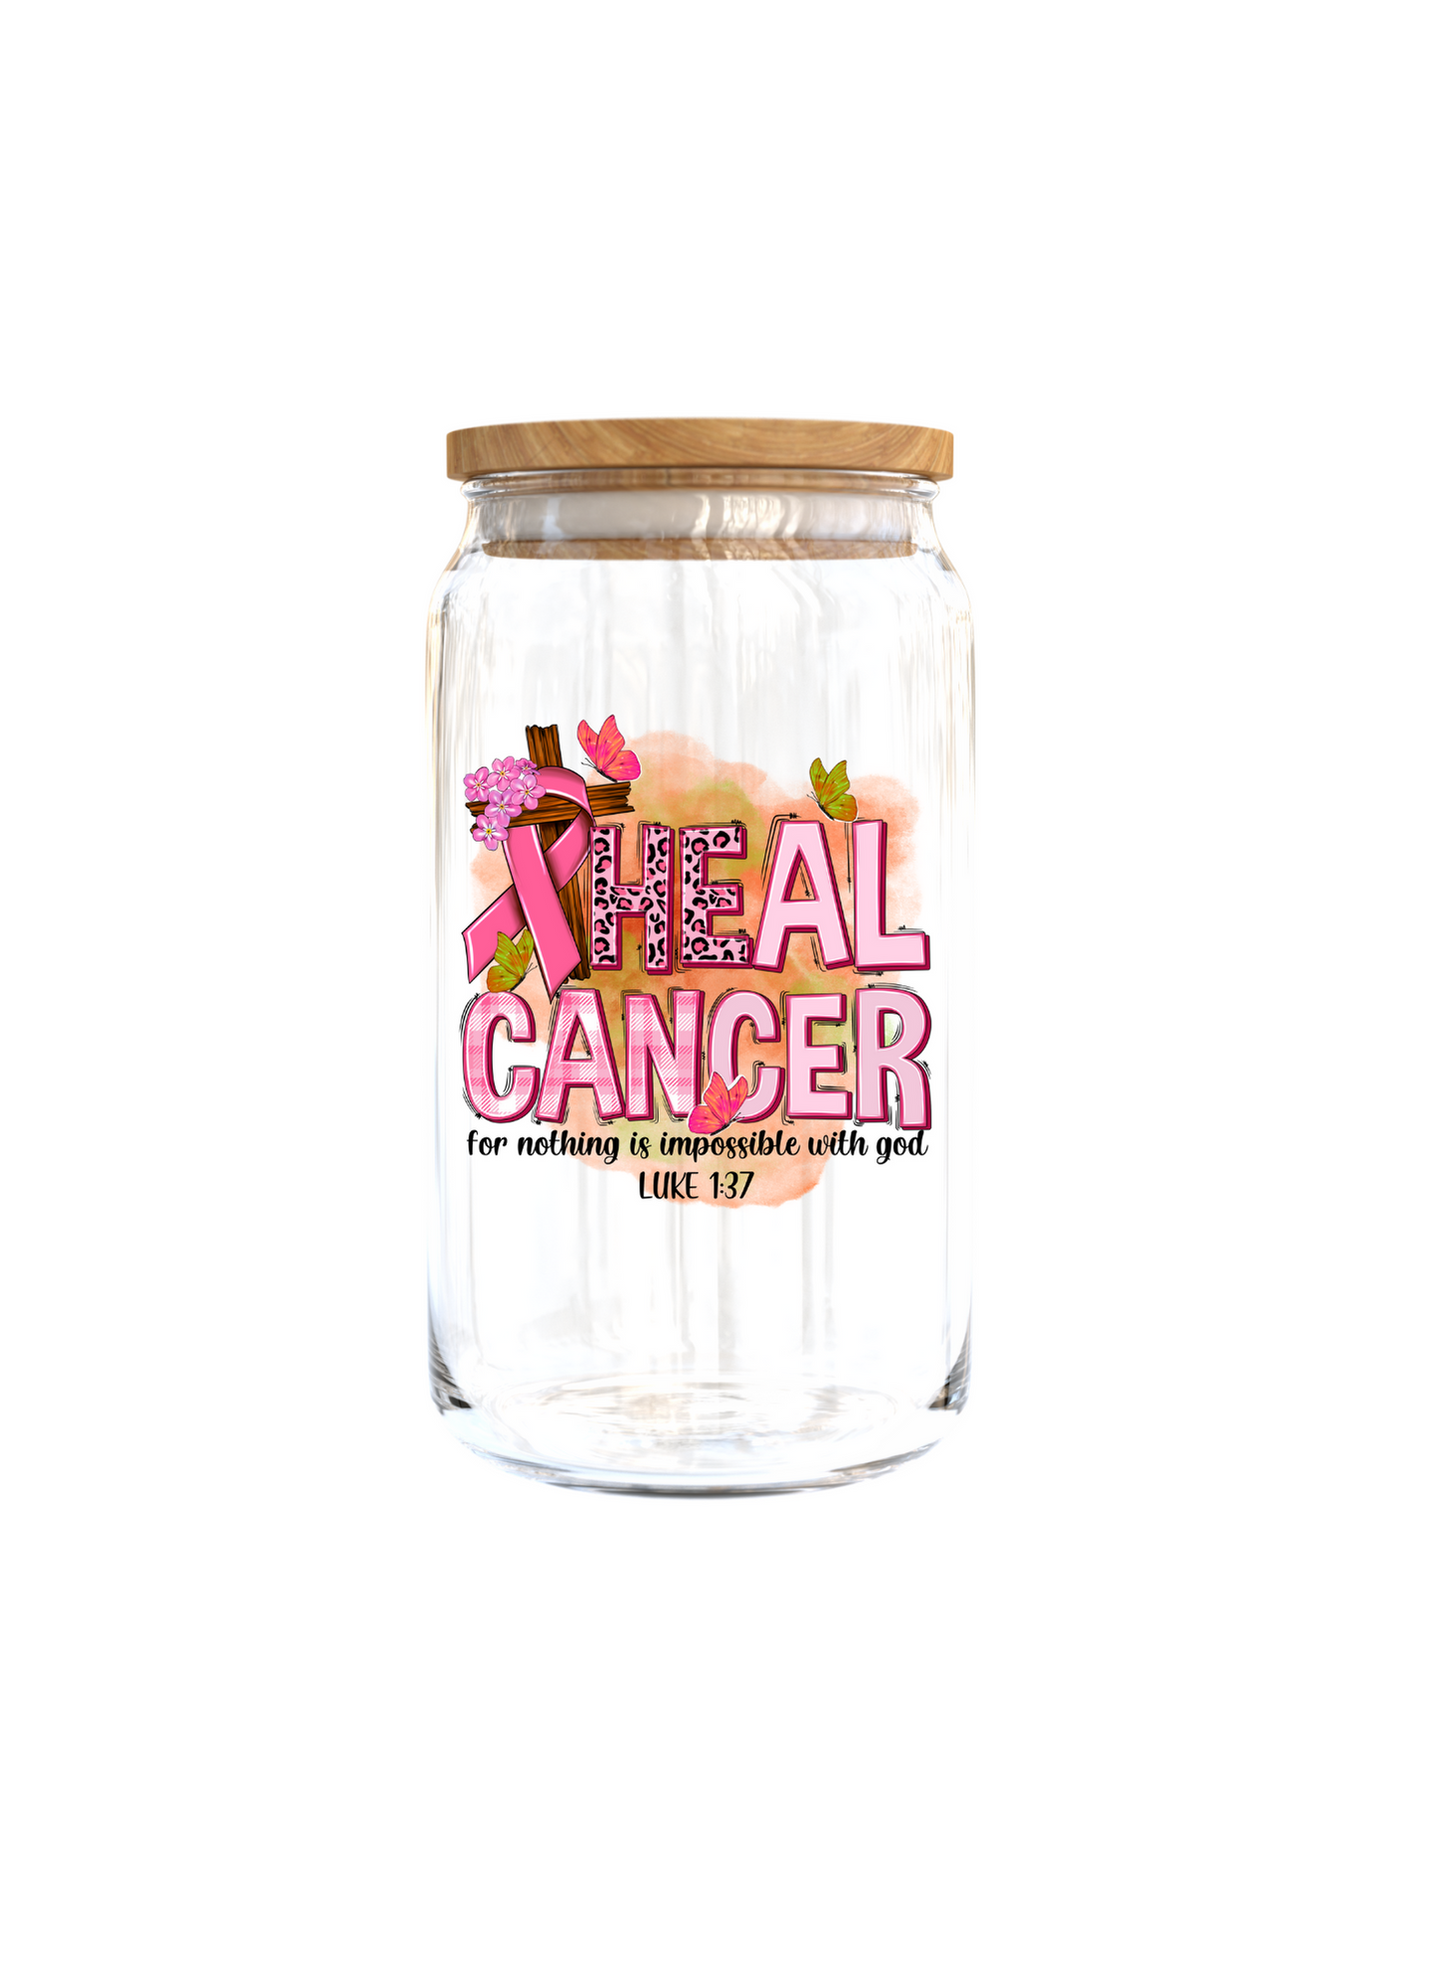 Heal Cancer| UV DTF DECAL 3''(Double Sided image)